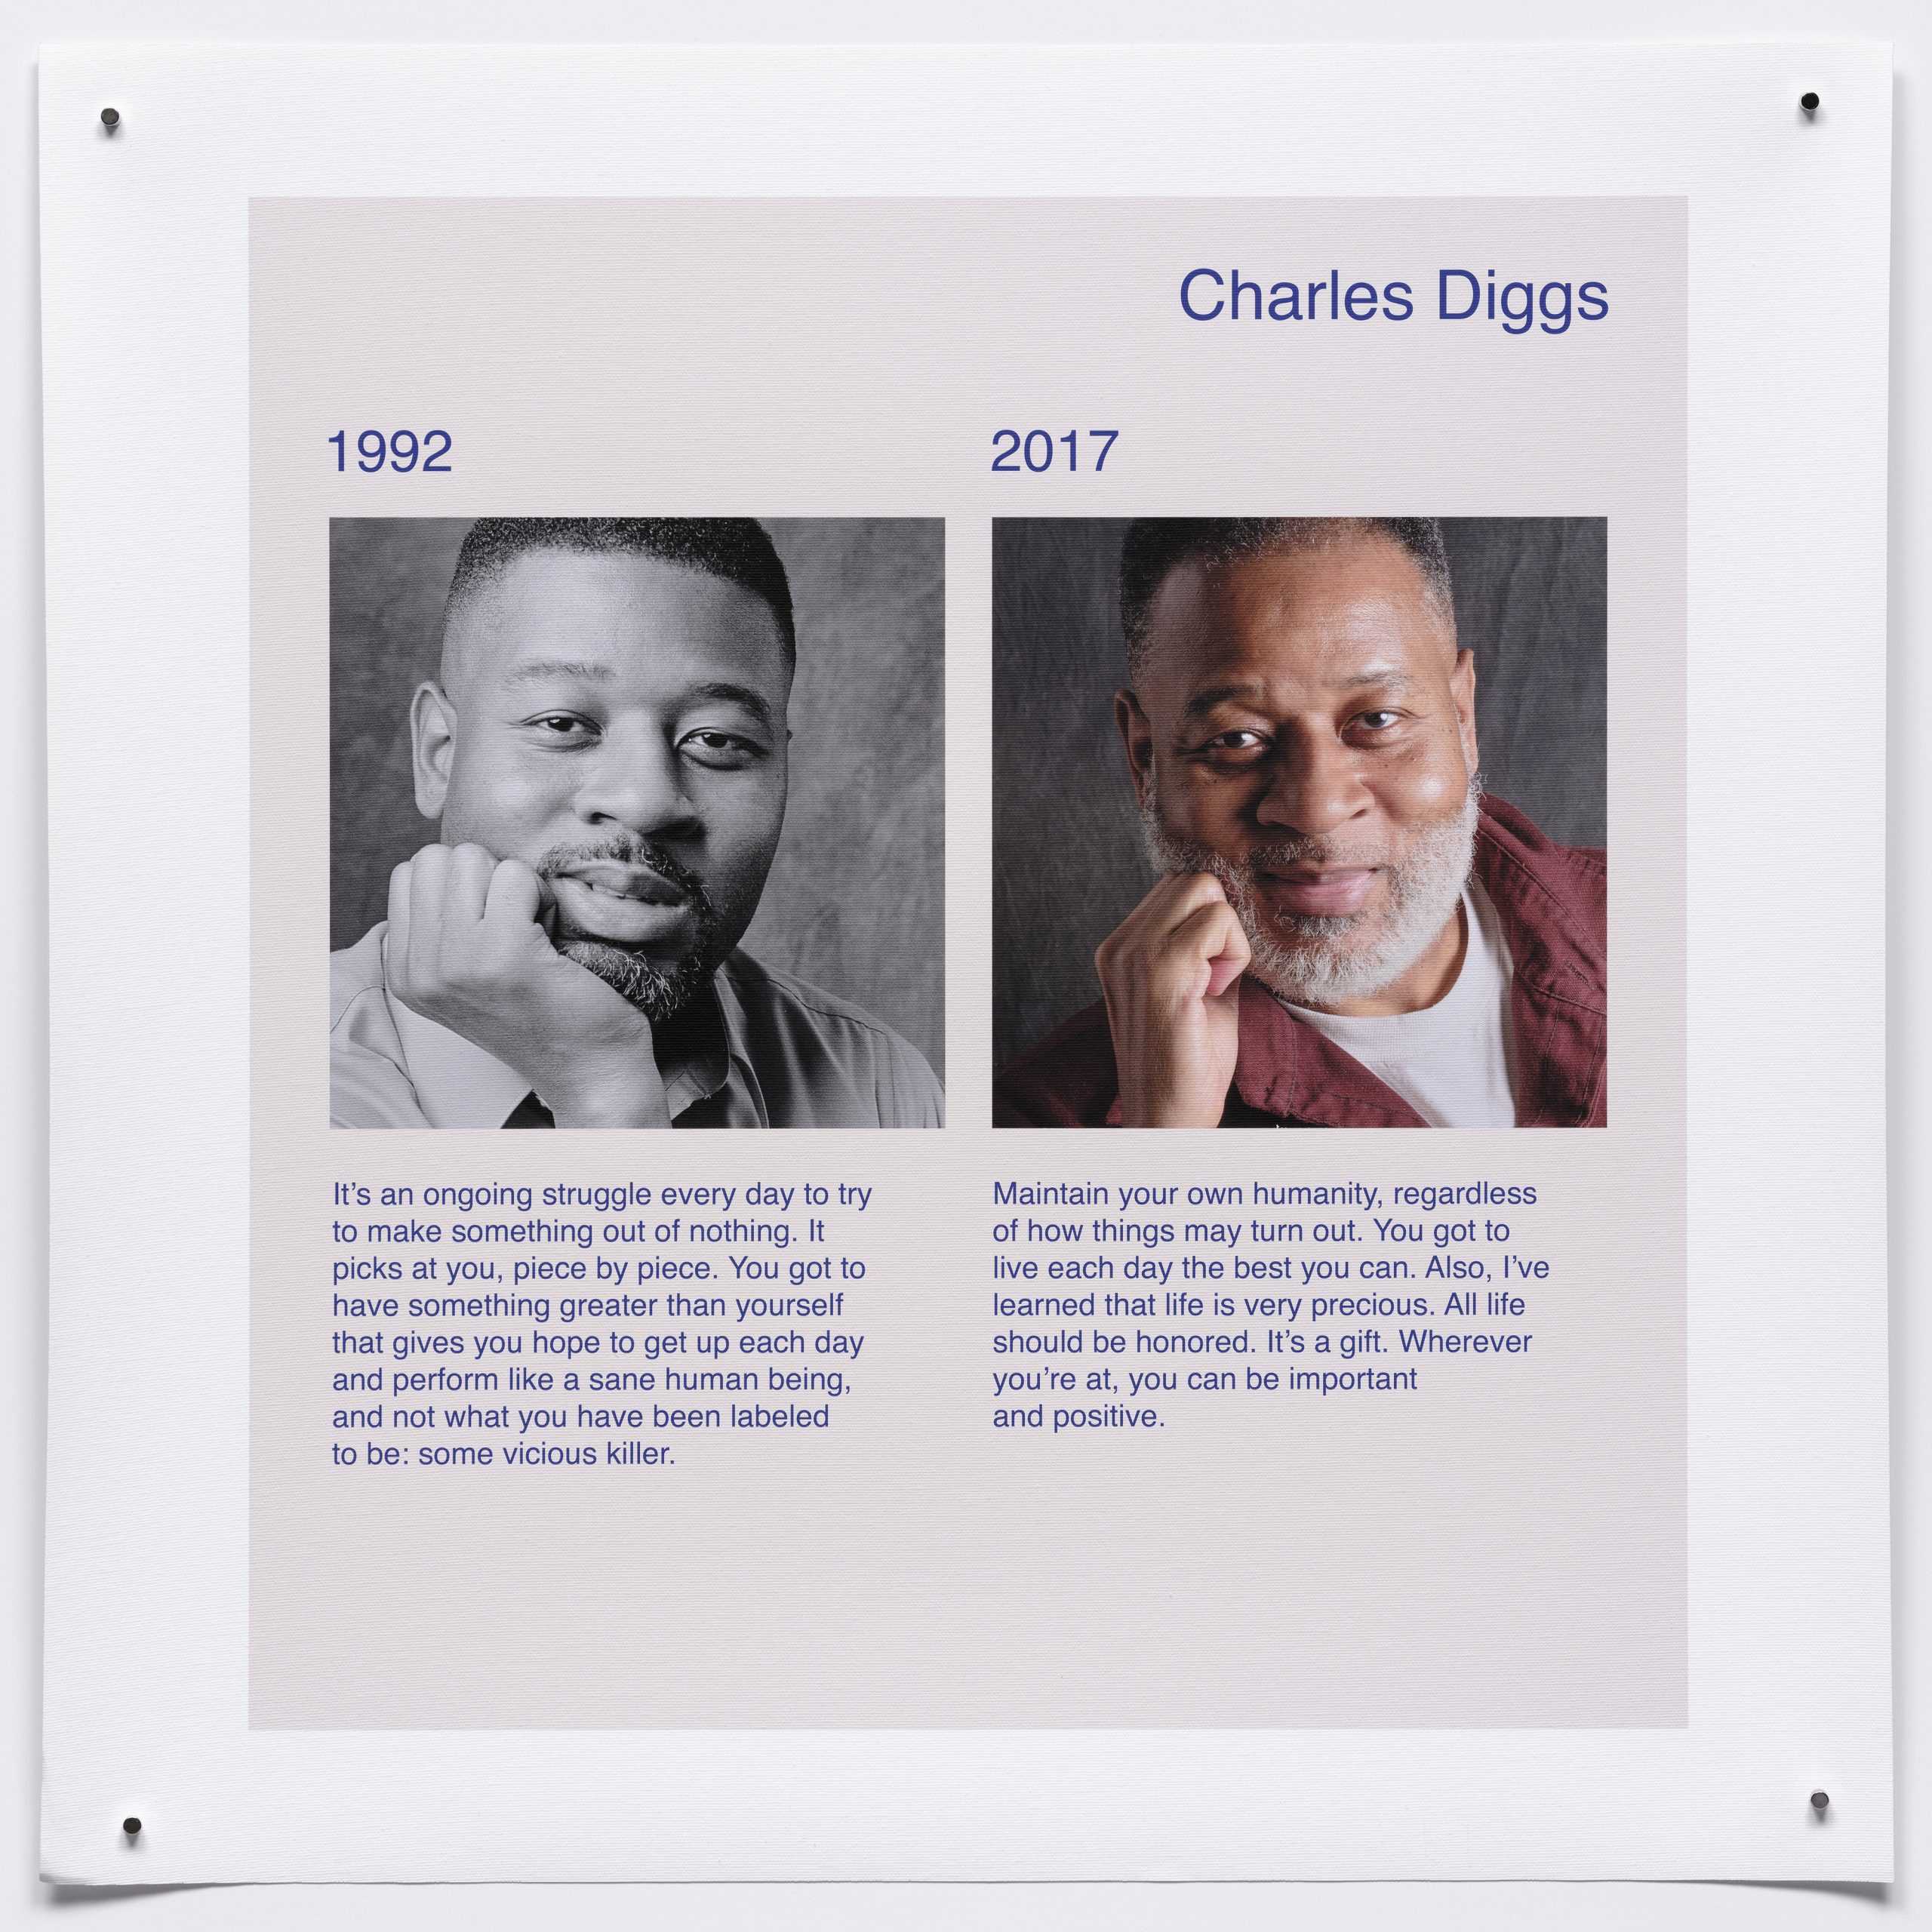 Two photographs side by side of Charles Diggs, taken in 1992 and 2017, one in black and white and the other in color. Diggs is Black and in both photos he is smiling warmly, resting his chin in his hand. Text statements appear beneath each photo.